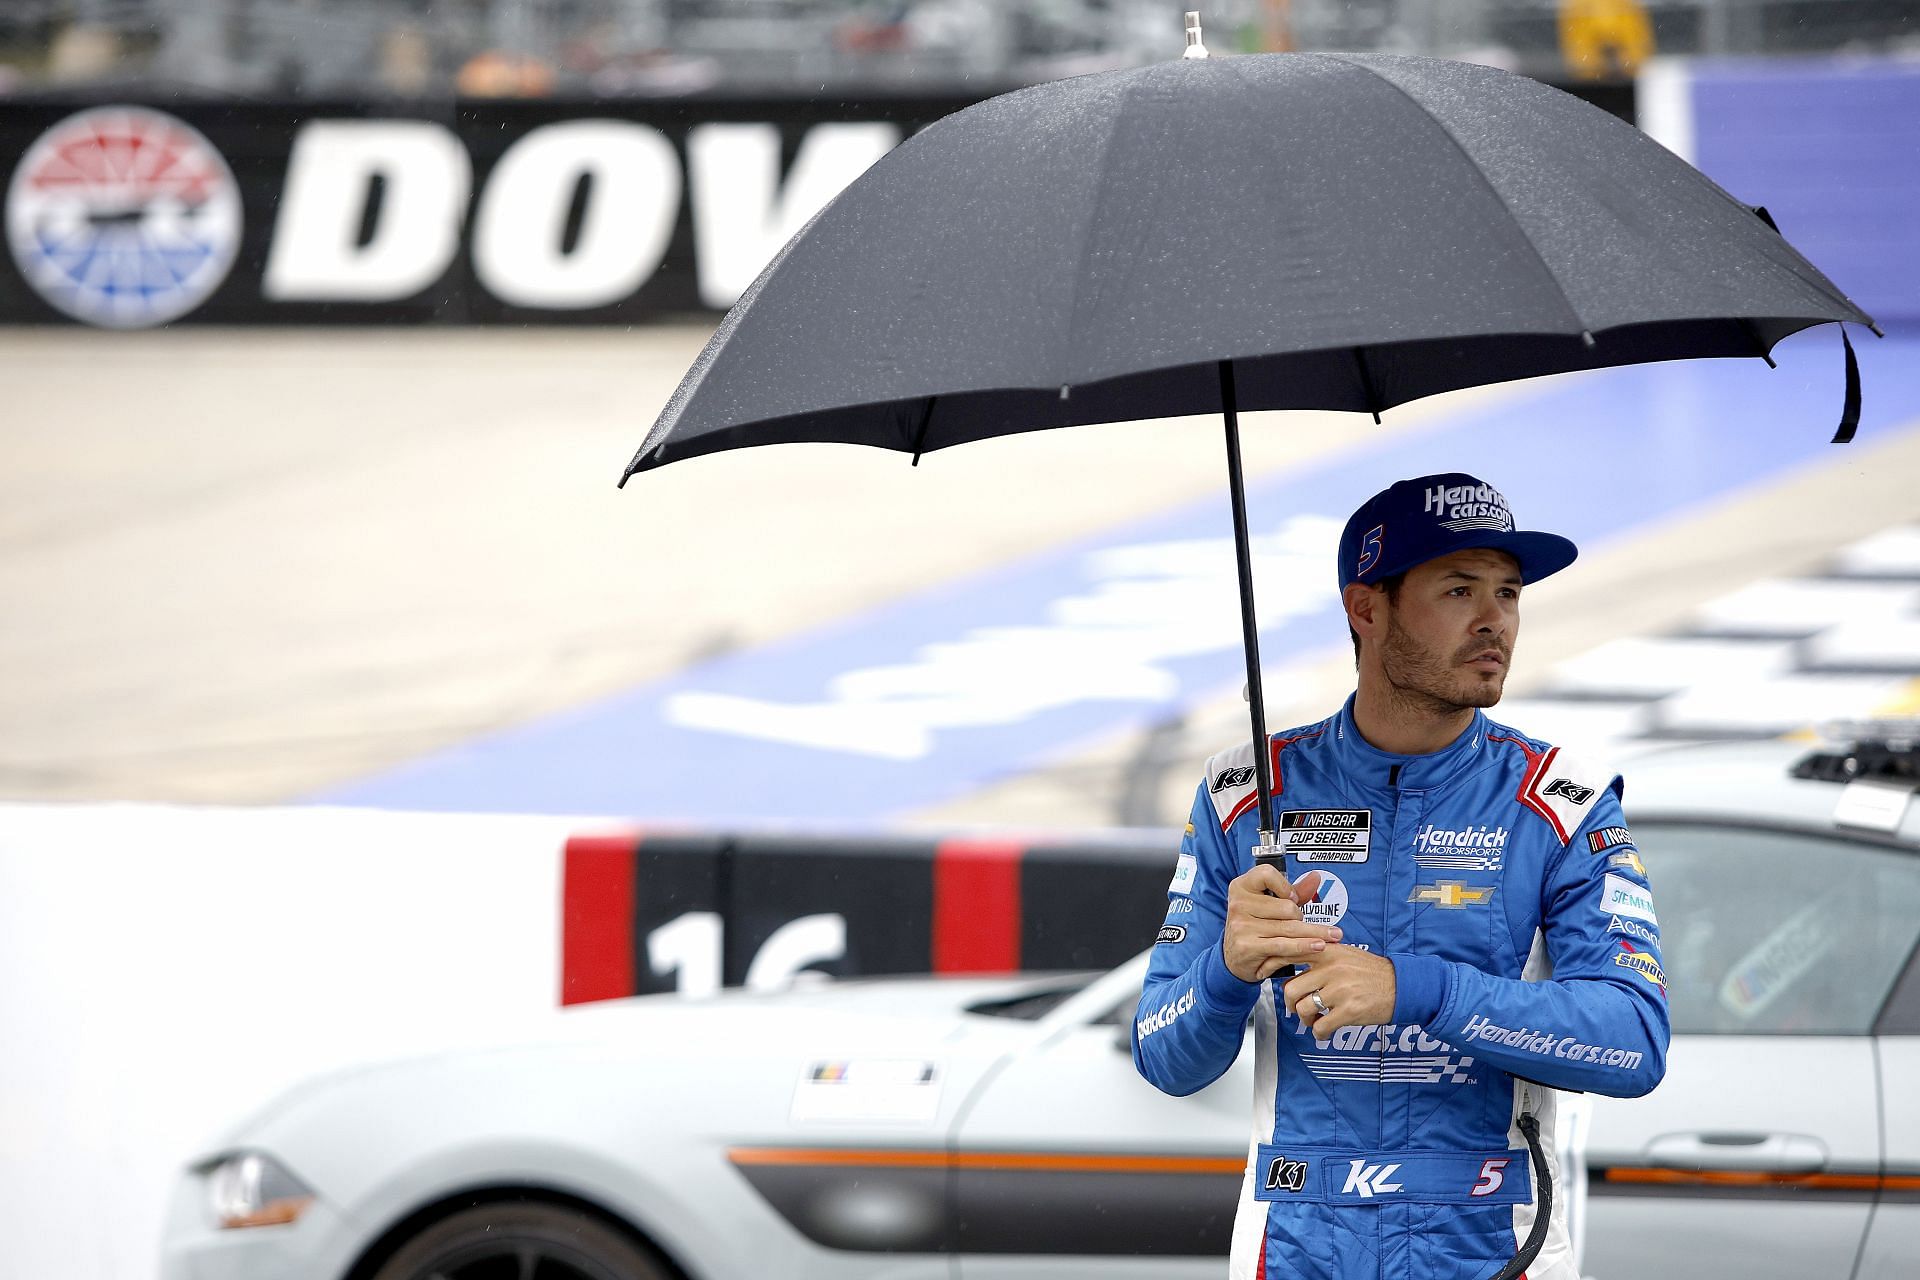 Kyle Larson looks on from under an umbrella during a rain delay in the NASCAR Cup Series DuraMAX Drydene 400 presented by RelaDyne at Dover Motor Speedway.